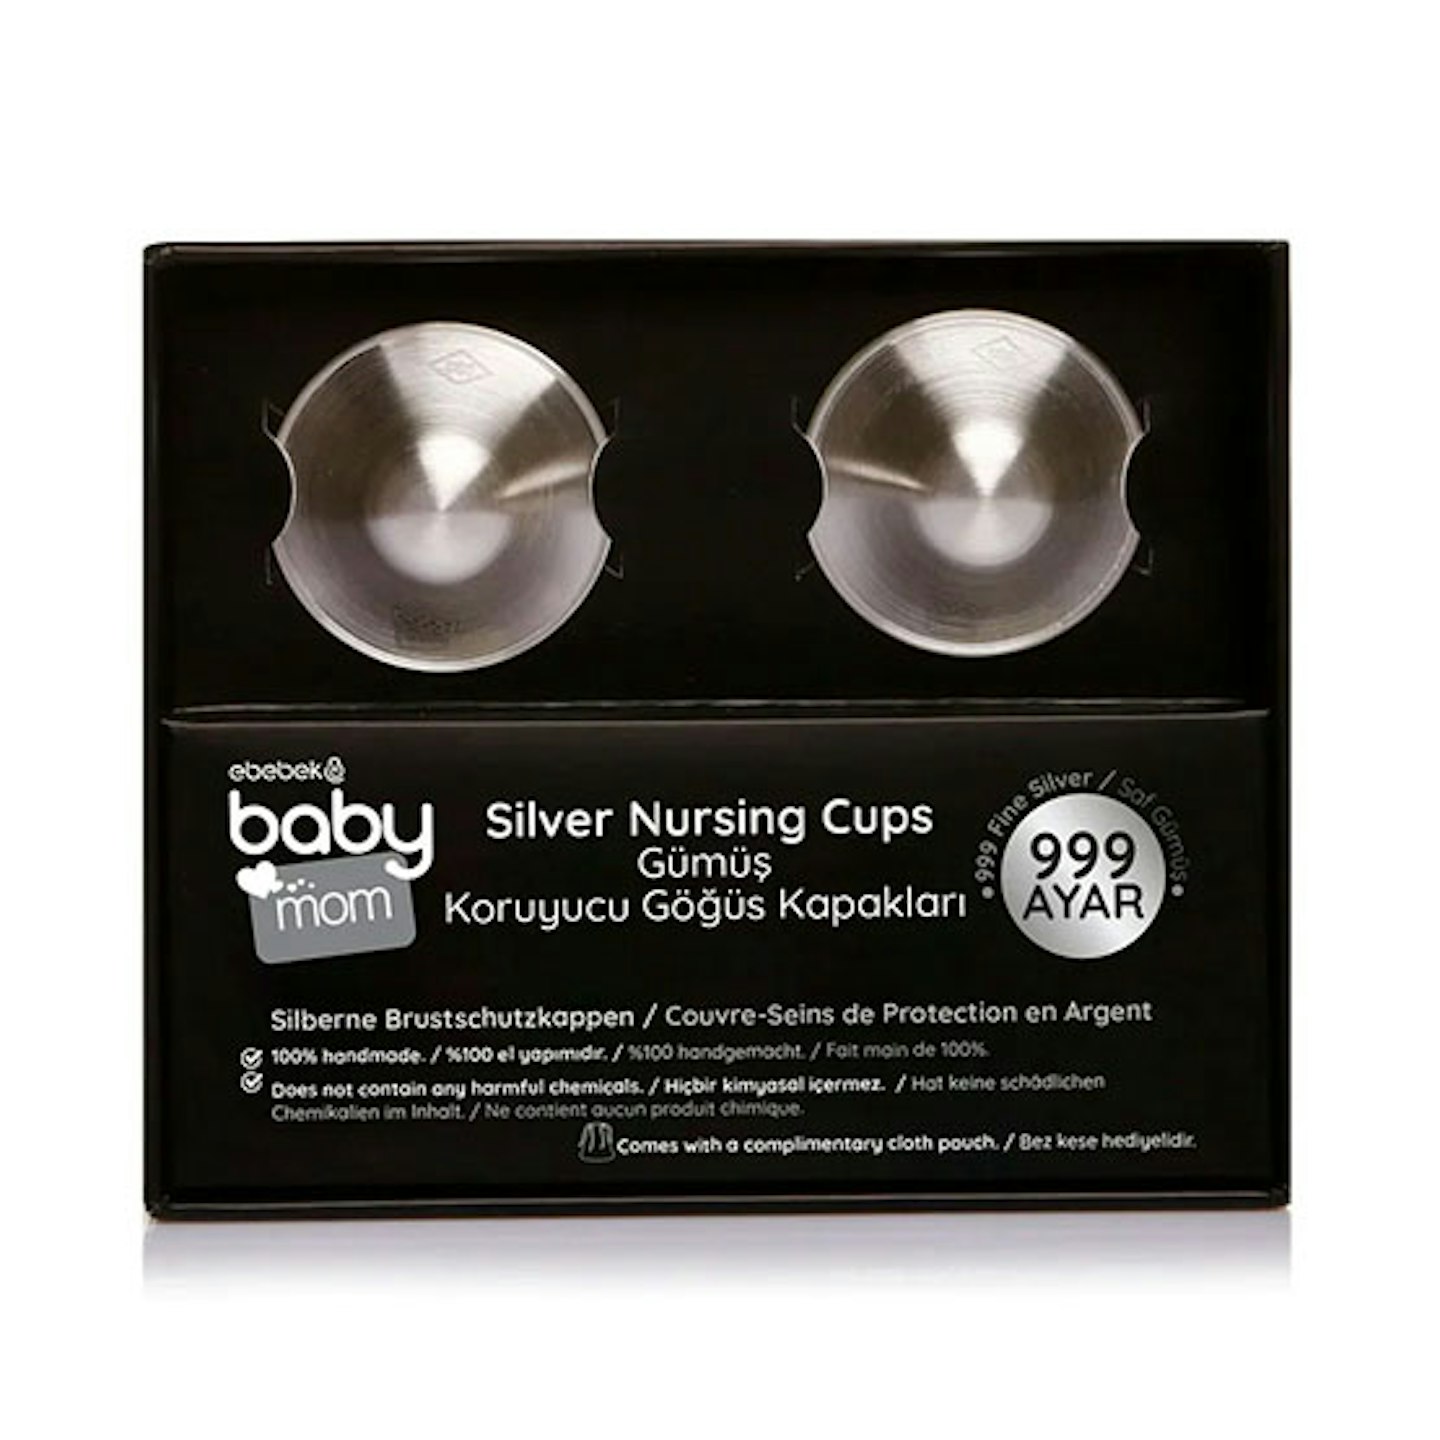 Everything you need to know about silver nursing cups for breastfeeding